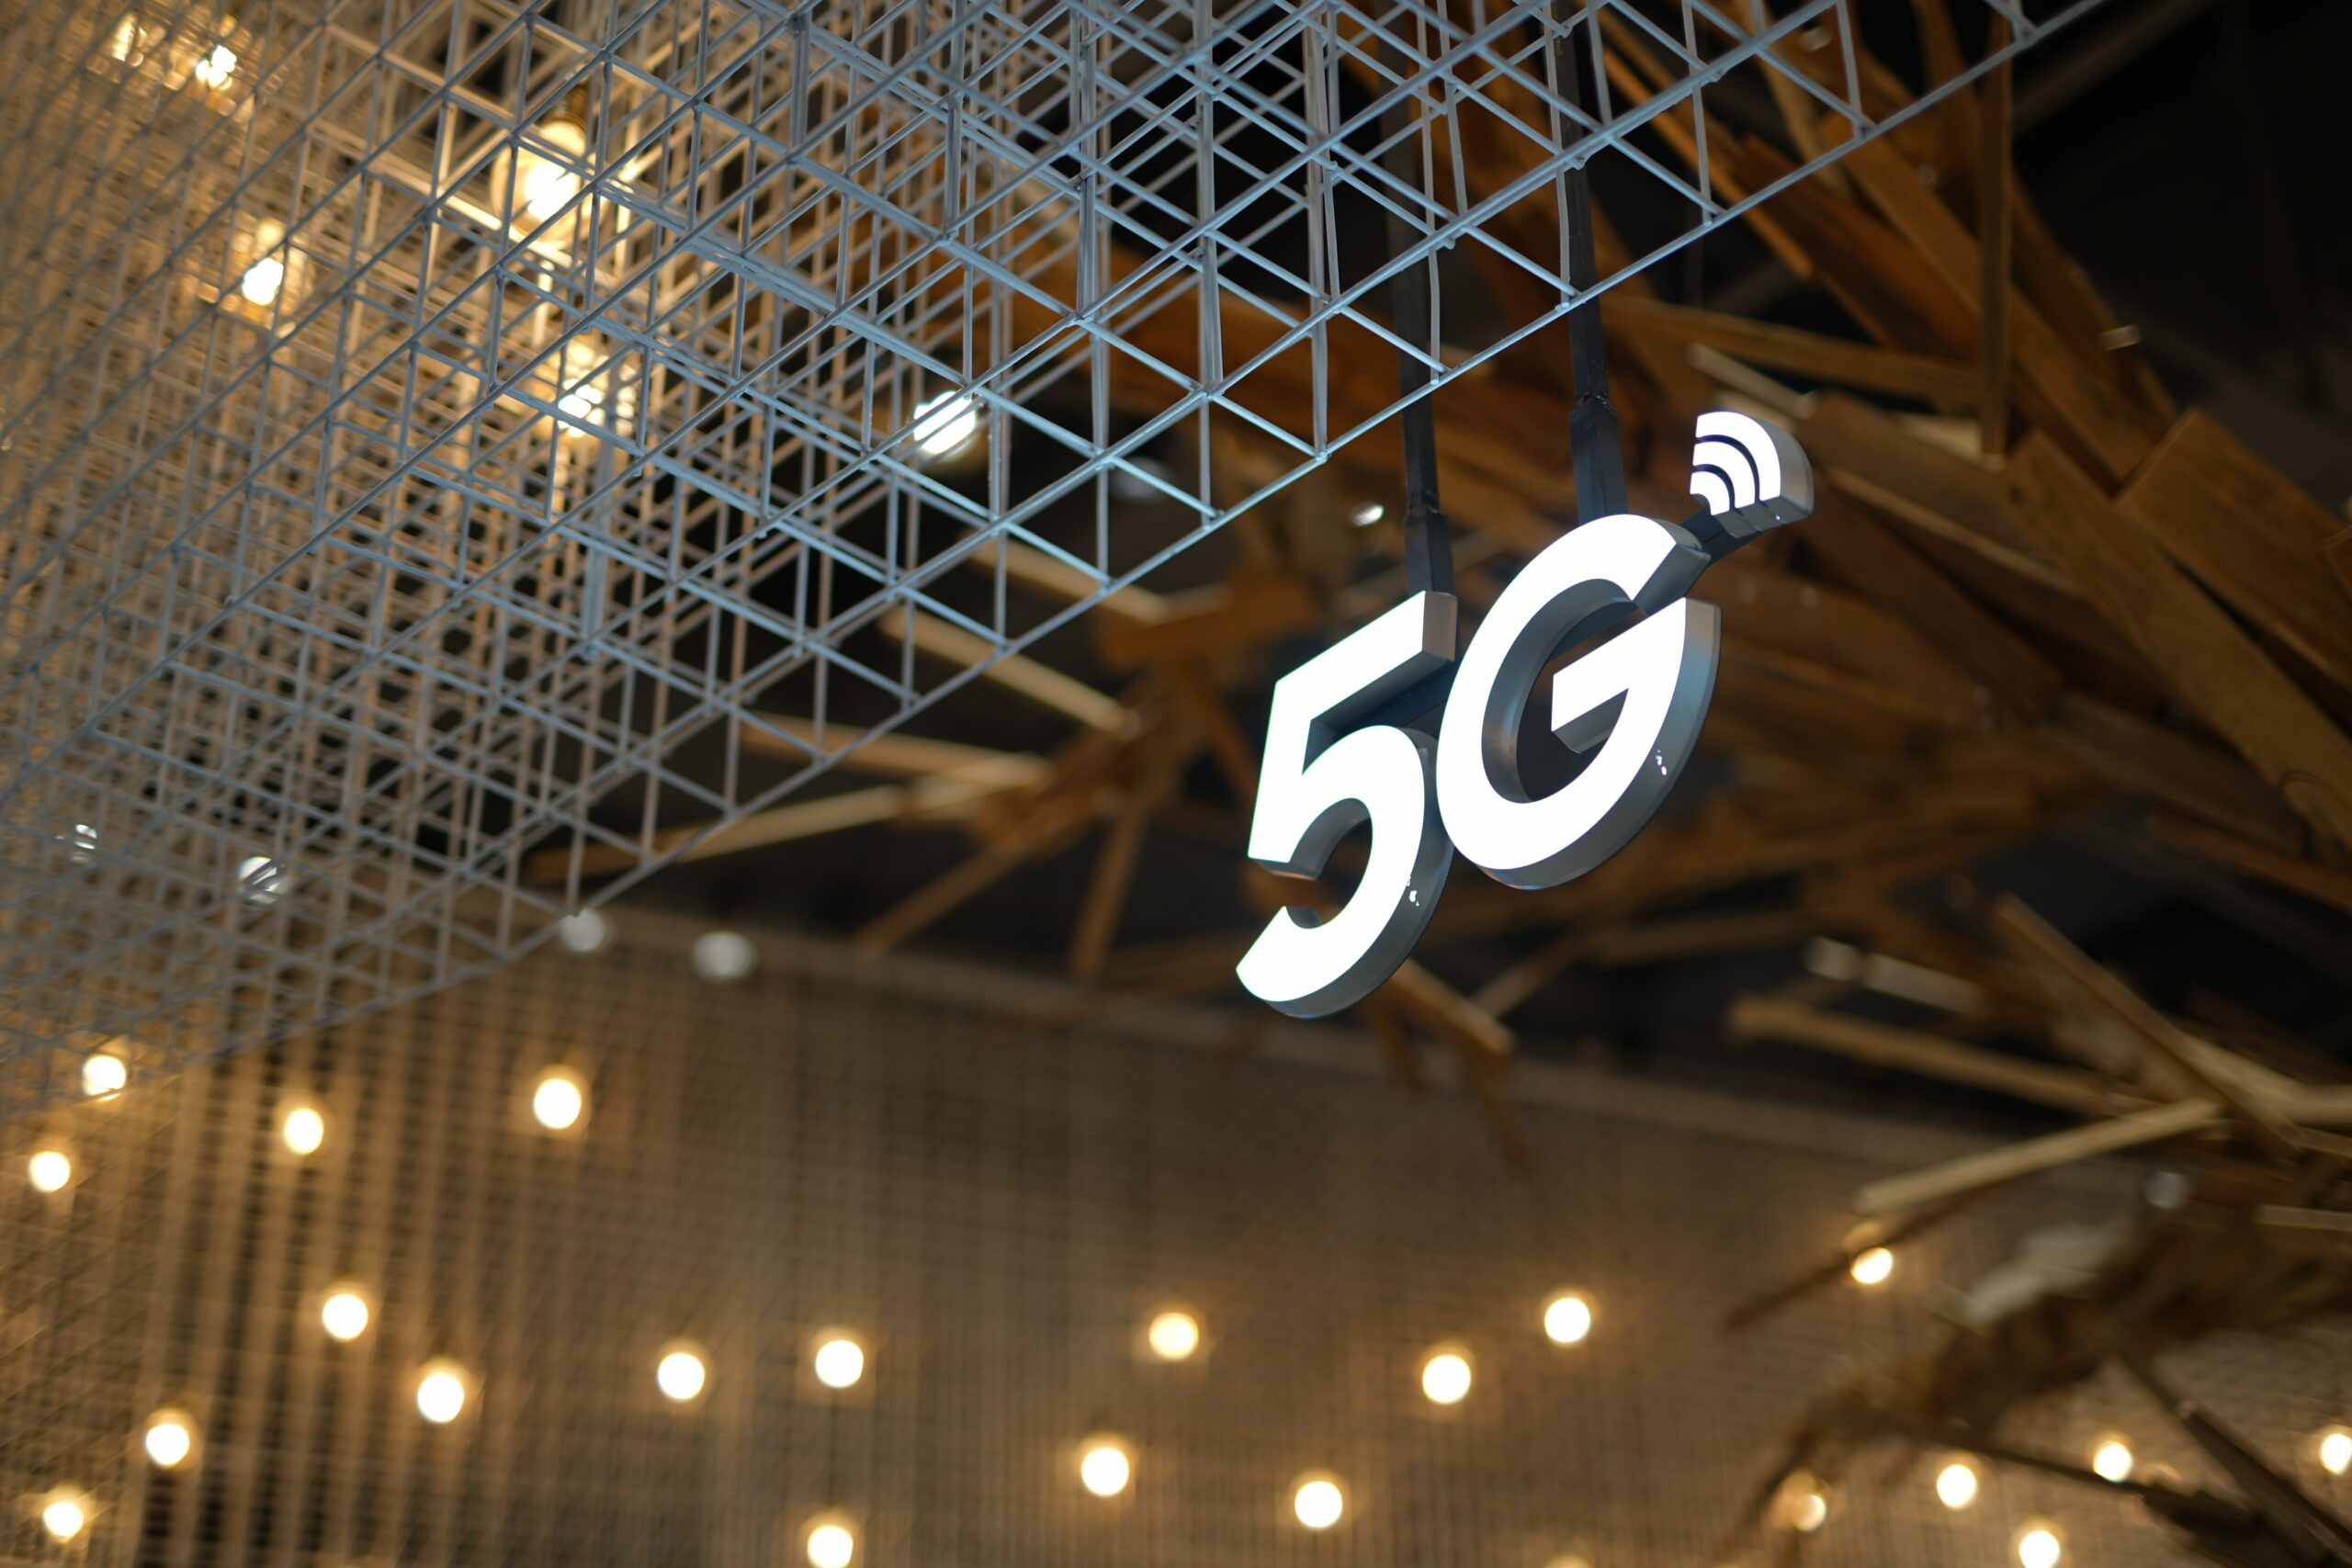 Ever heard of 5G? Let’s see exactly why it’s awesome!